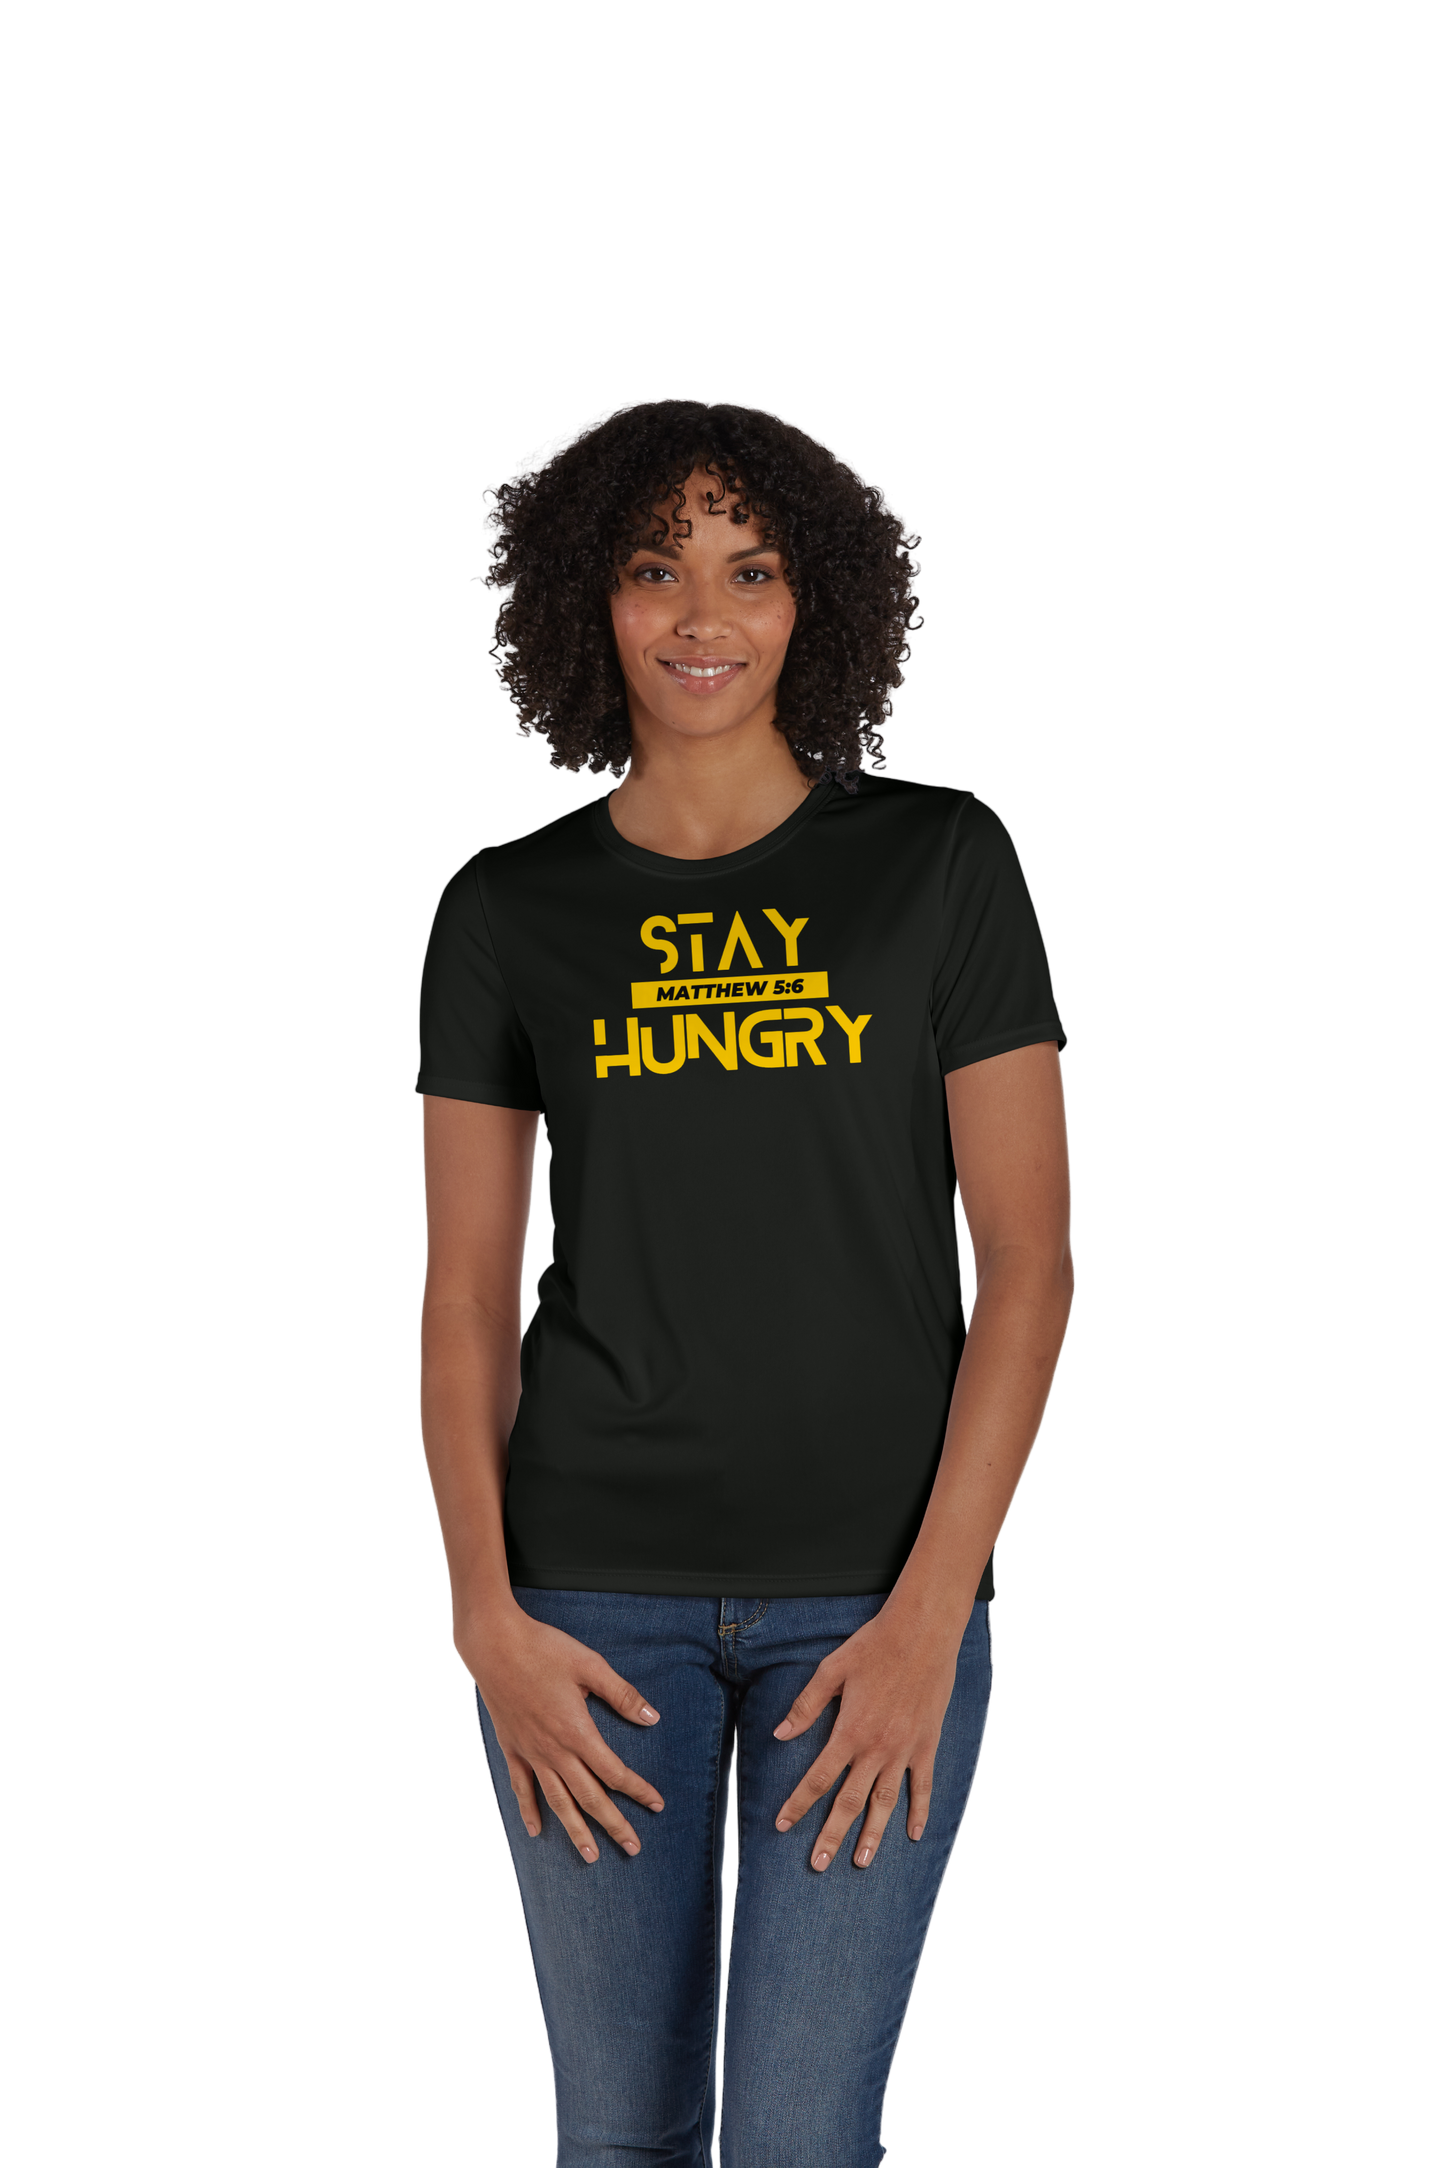 Stay Hungry Women's Dri-fit